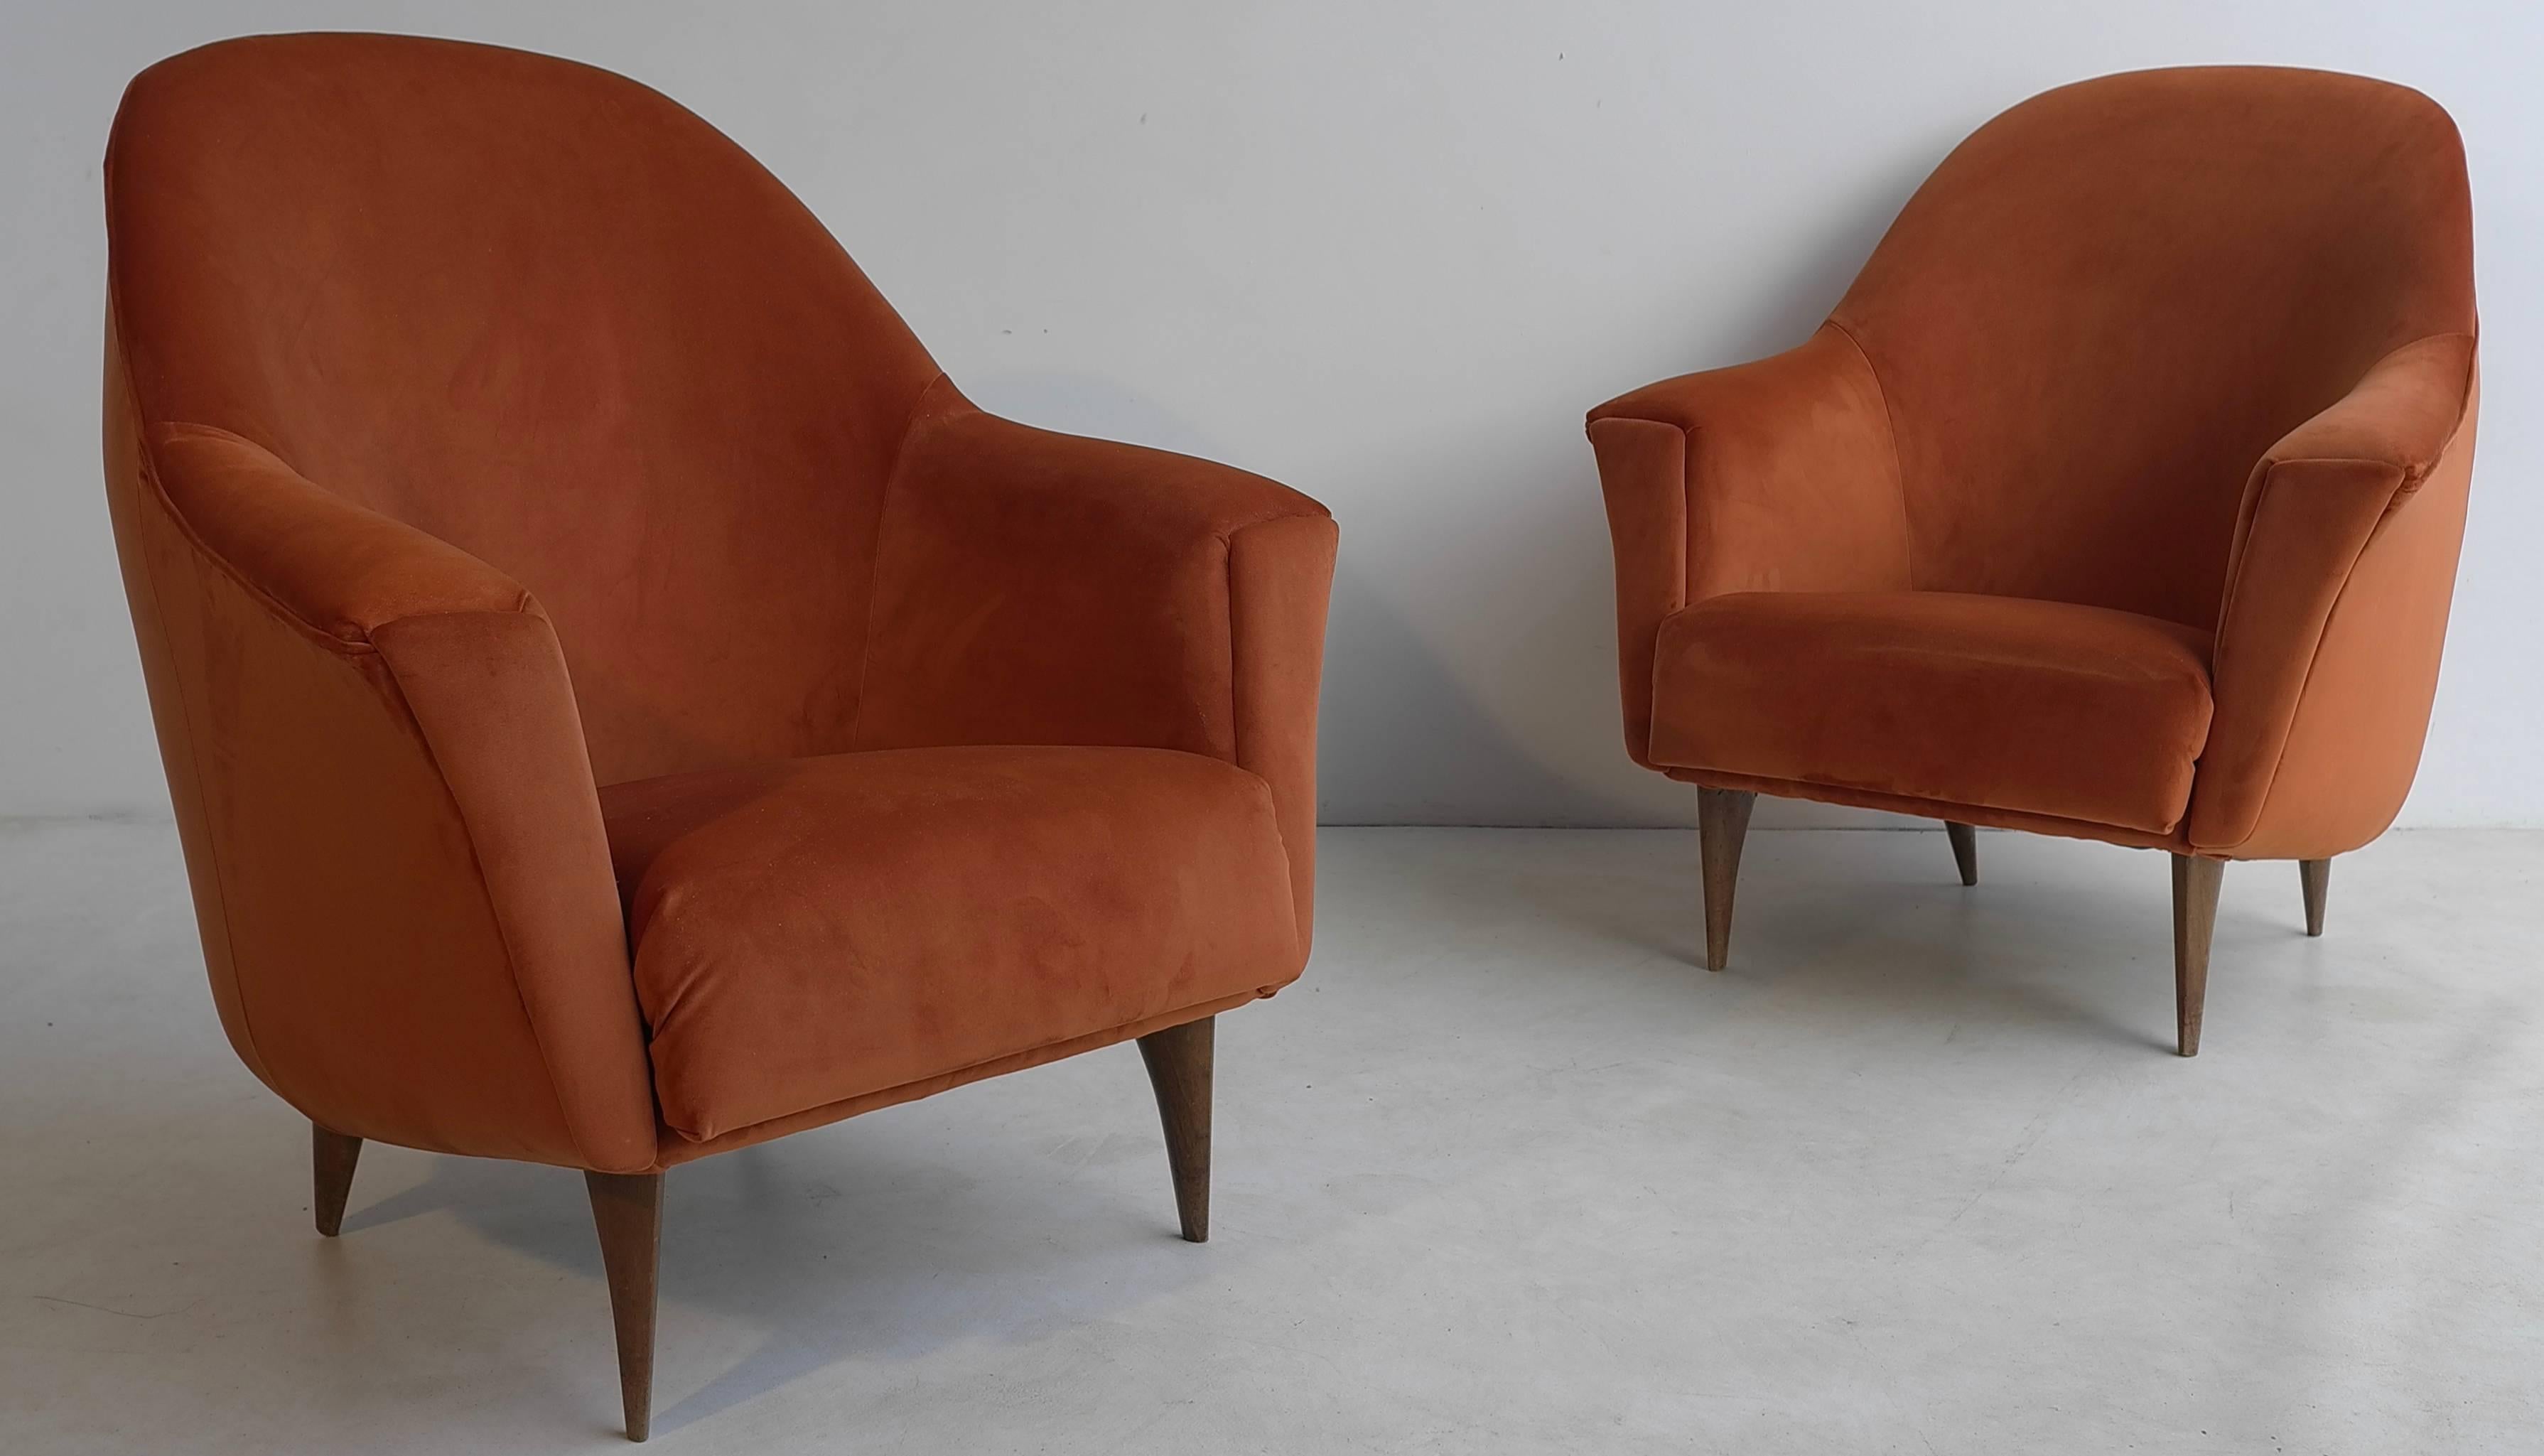 Pair of armchairs in red terra velvet style with beautiful shaped wooden legs, Italy, 1950s.